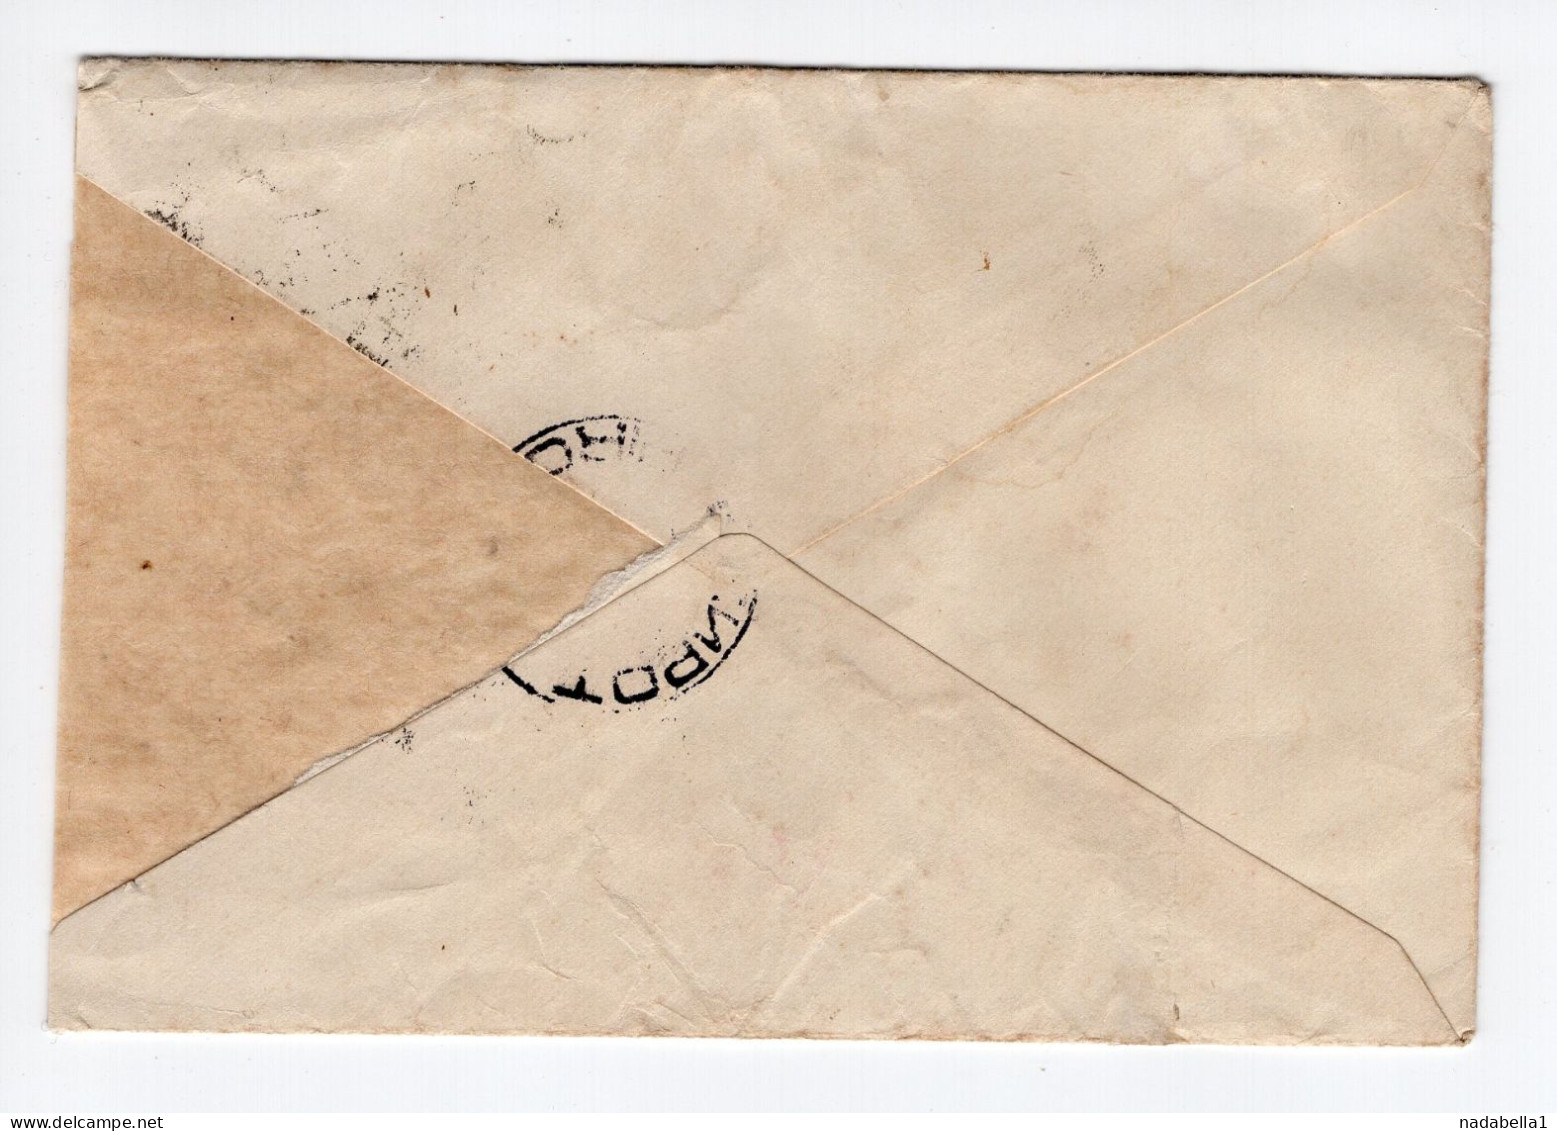 1947? YUGOSLAVIA,SERBIA,ALEKSINAC TO PIROT COVER,POSTAGE DUE STAMP USED AS POSTAL STAMP - Timbres-taxe